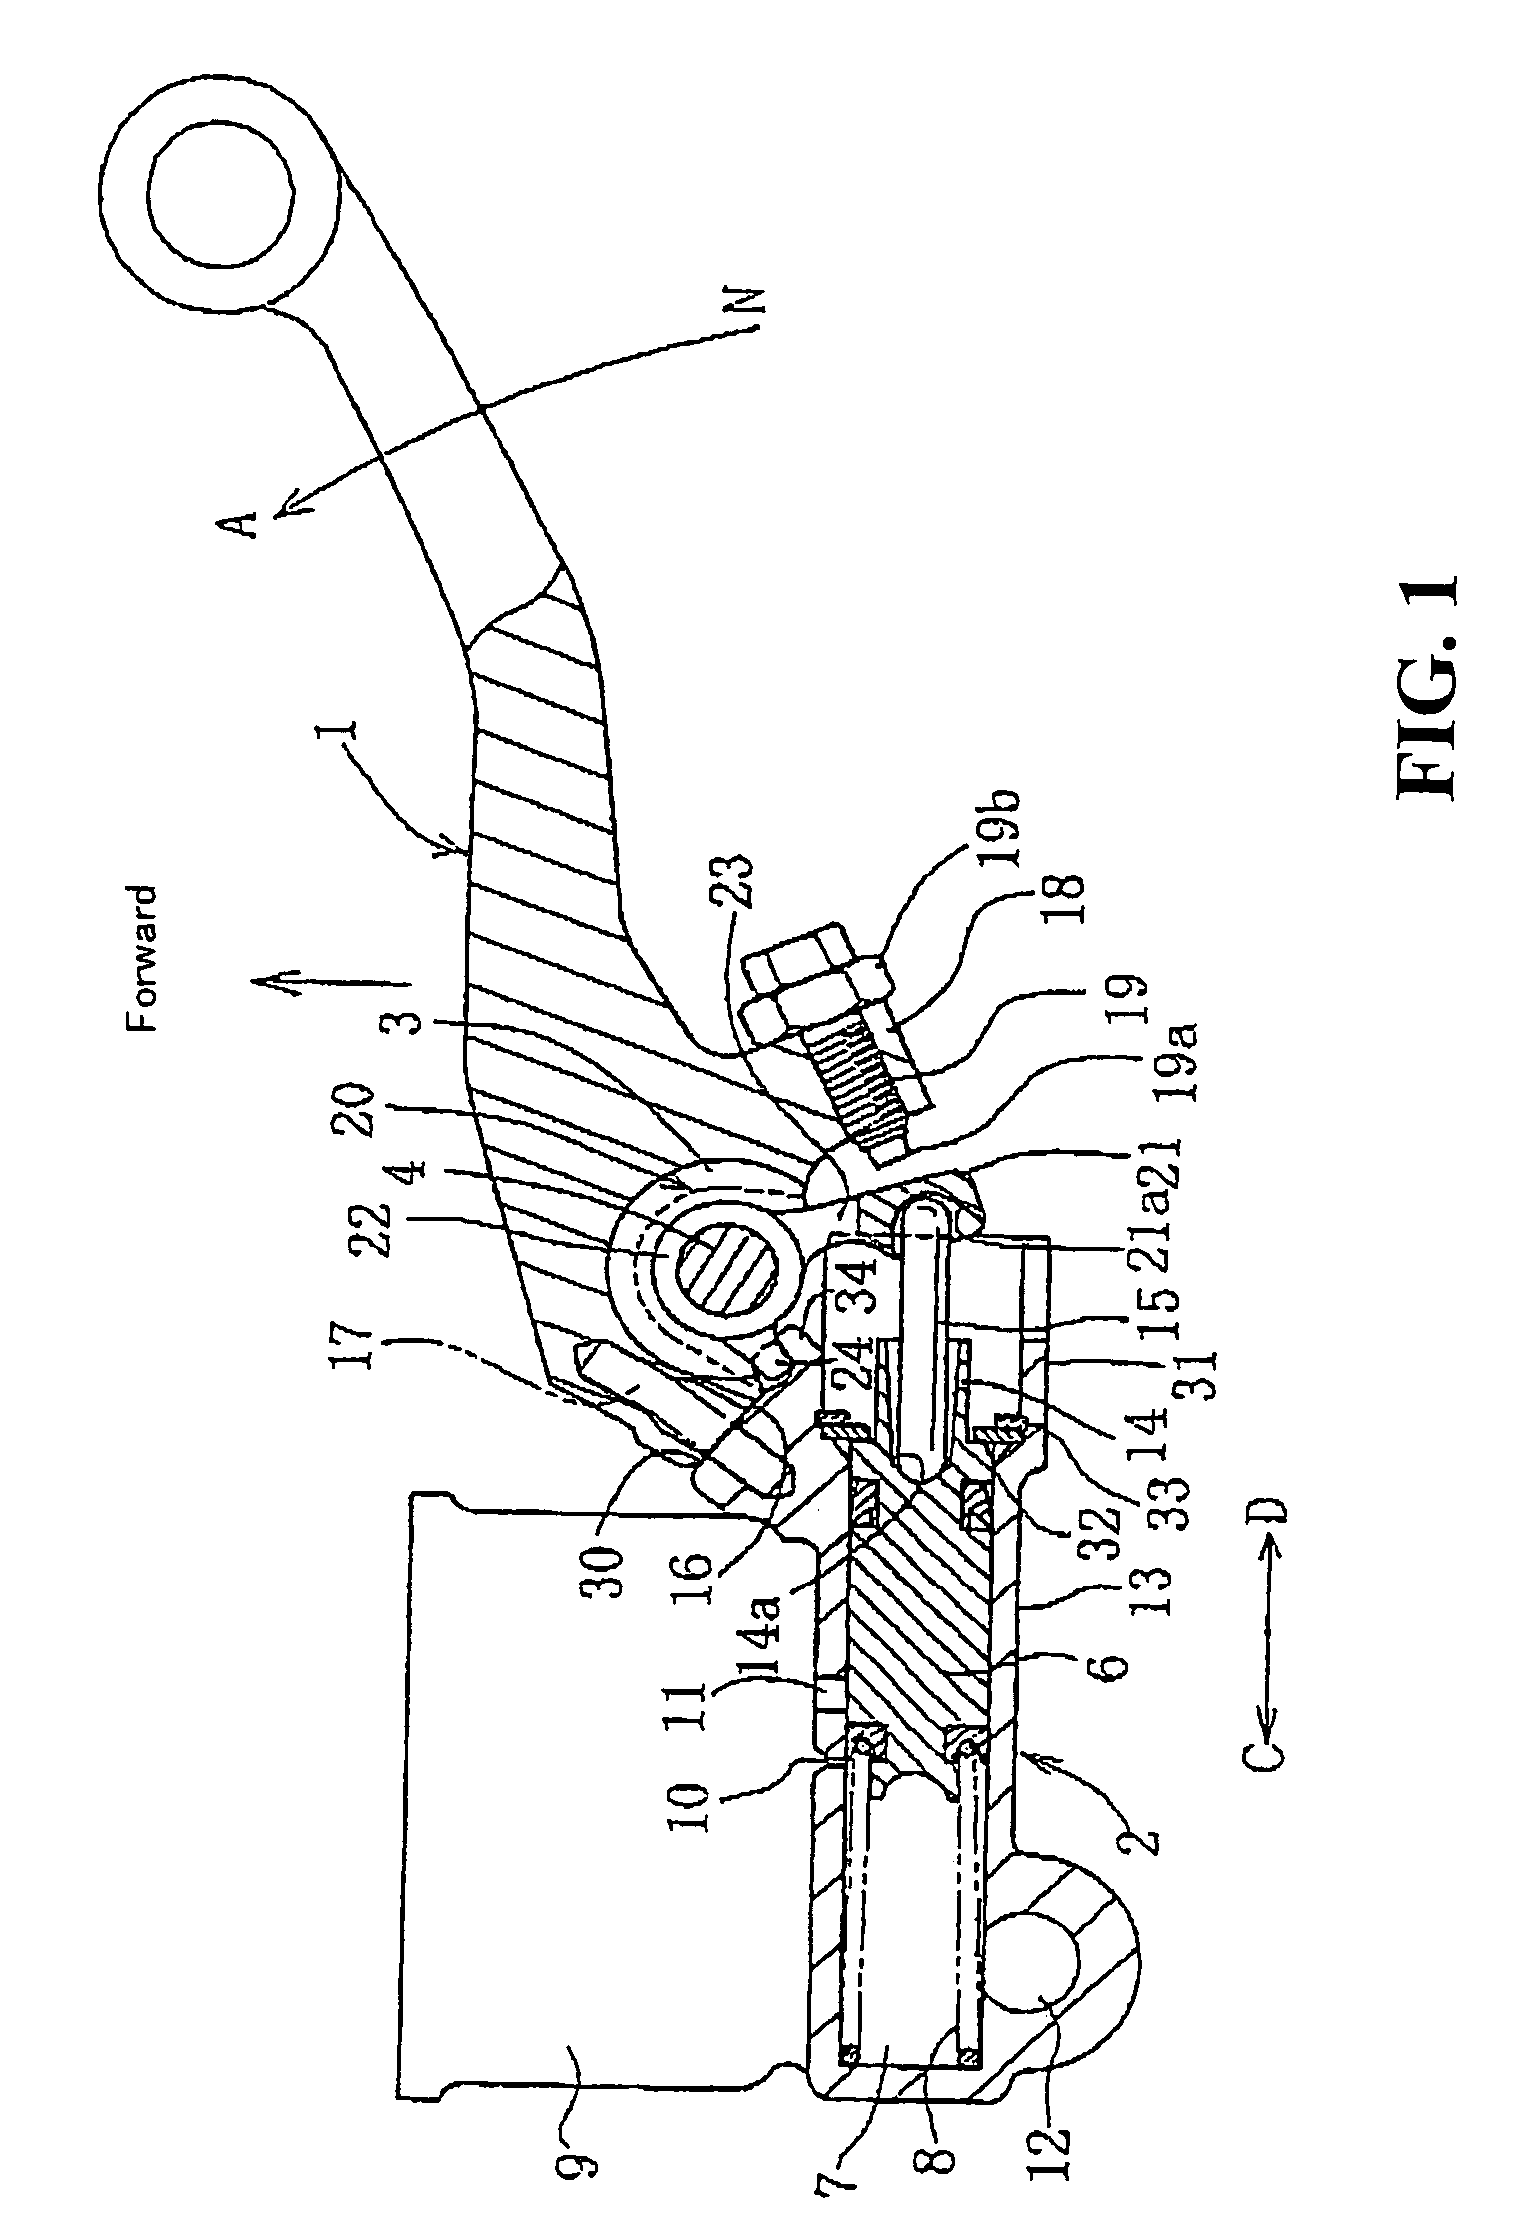 Lever device for hydraulic operation